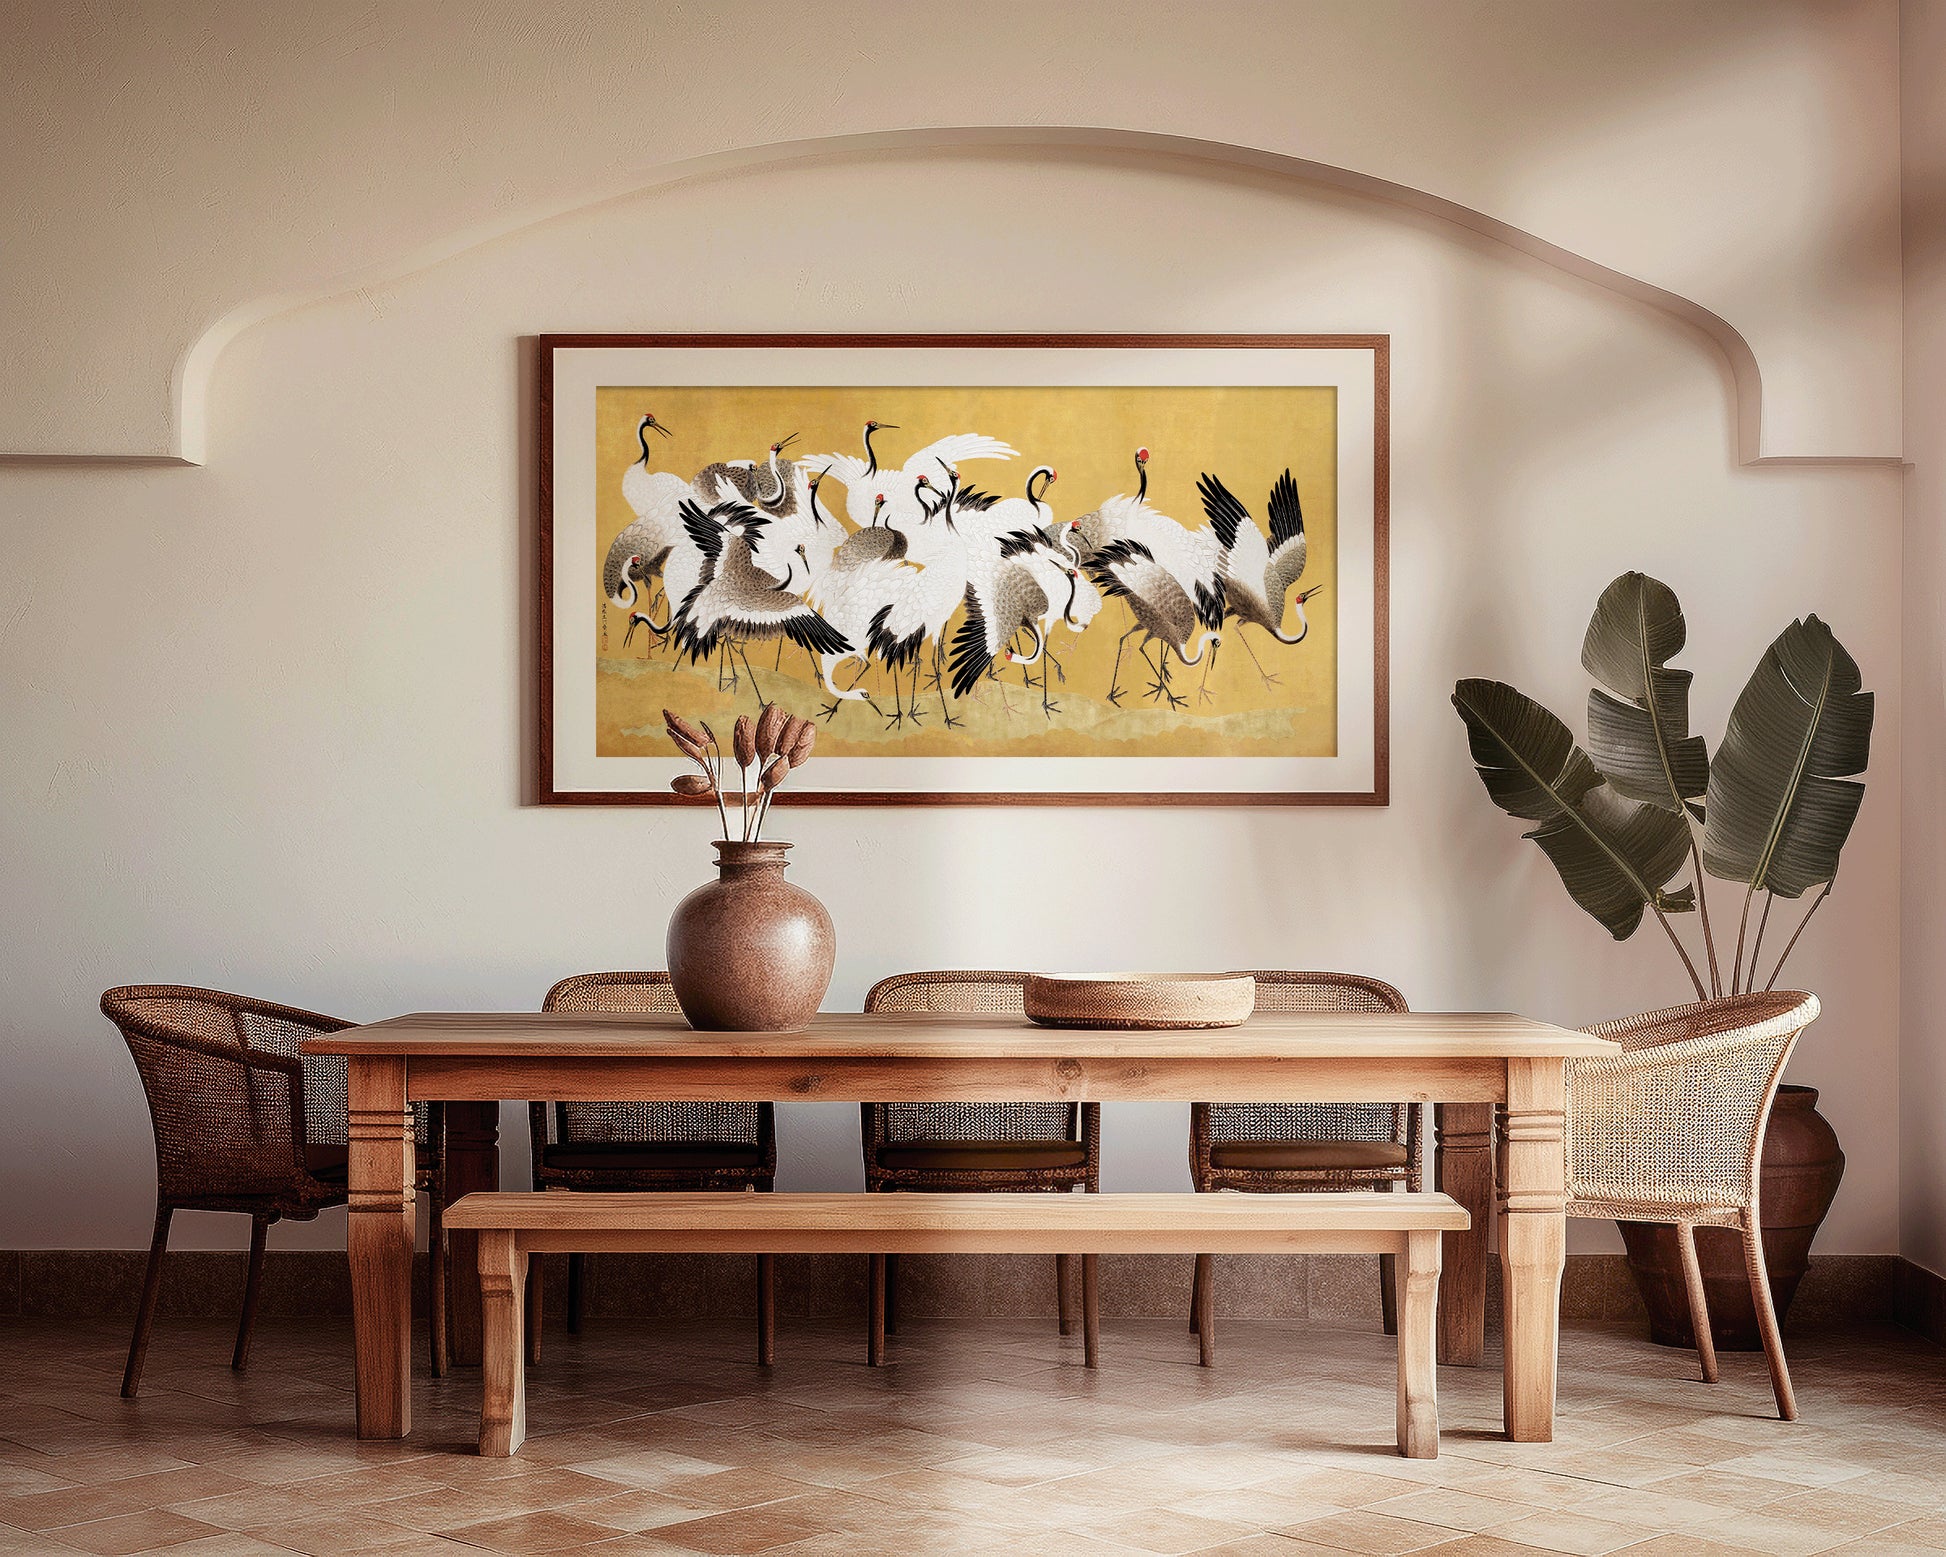 Ishida Yutei - A Flock of Cranes | Vintage Japanese Wide Panoramic Art (available framed or unframed)